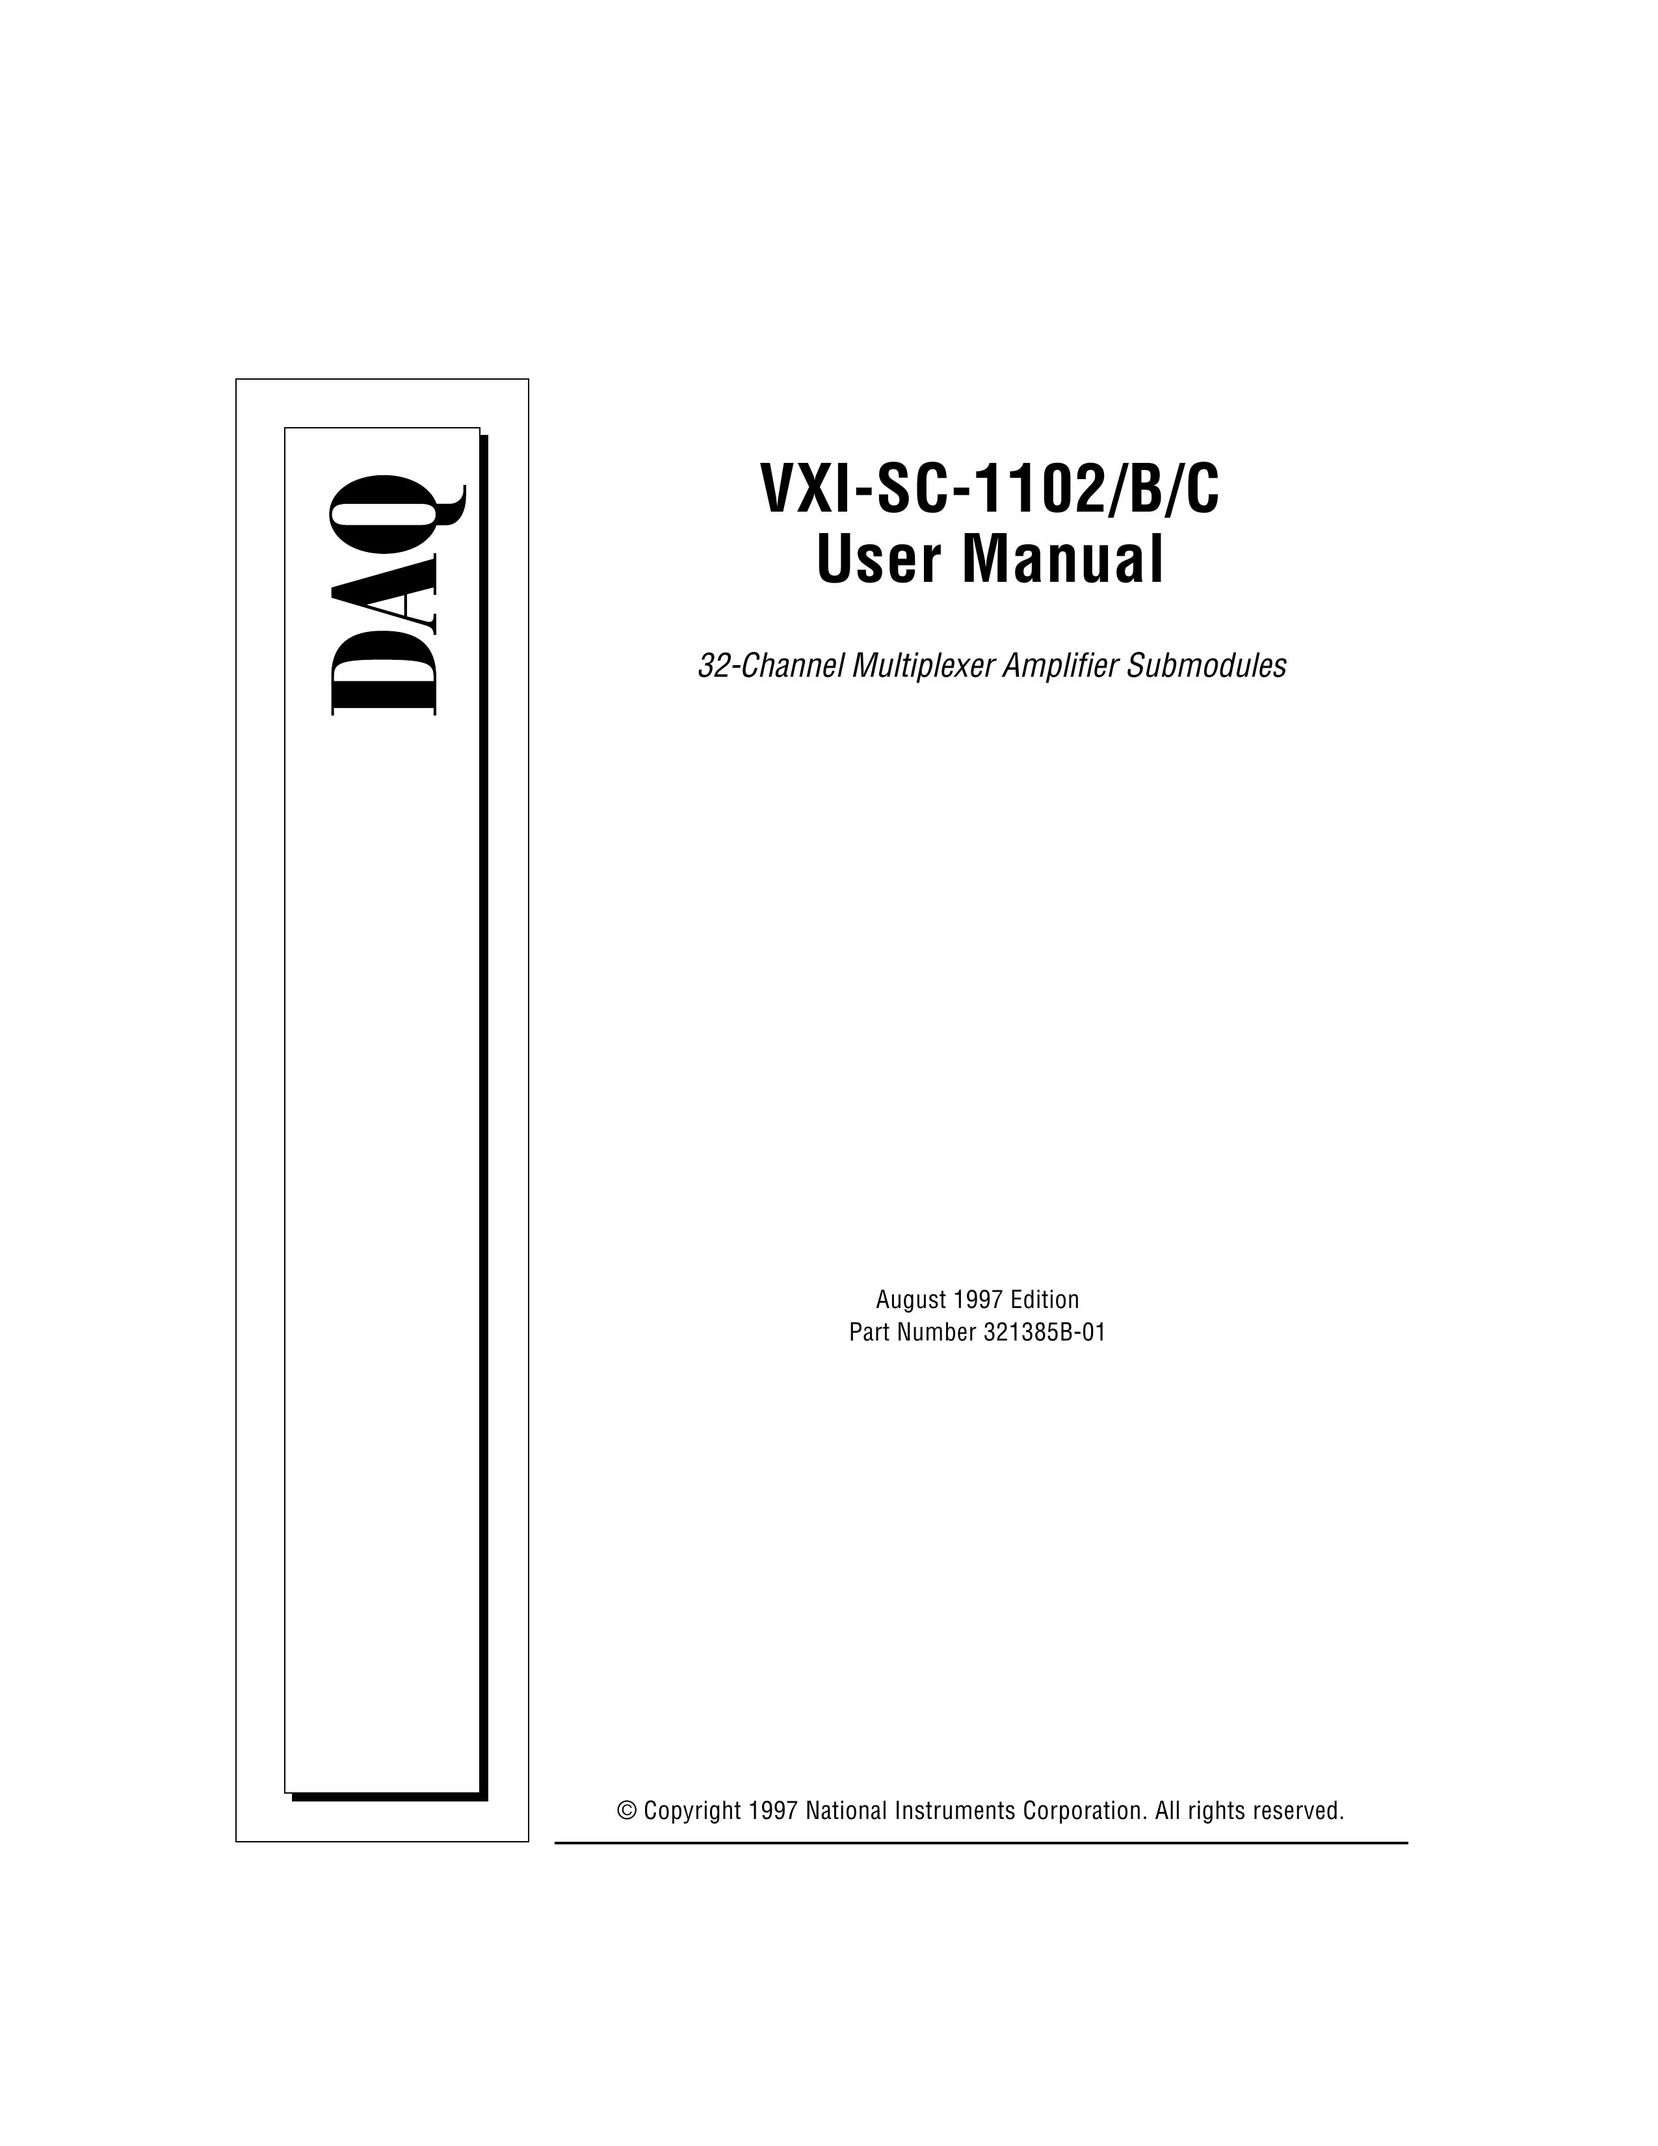 National Instruments VXI-SC-1102 Stereo Amplifier User Manual